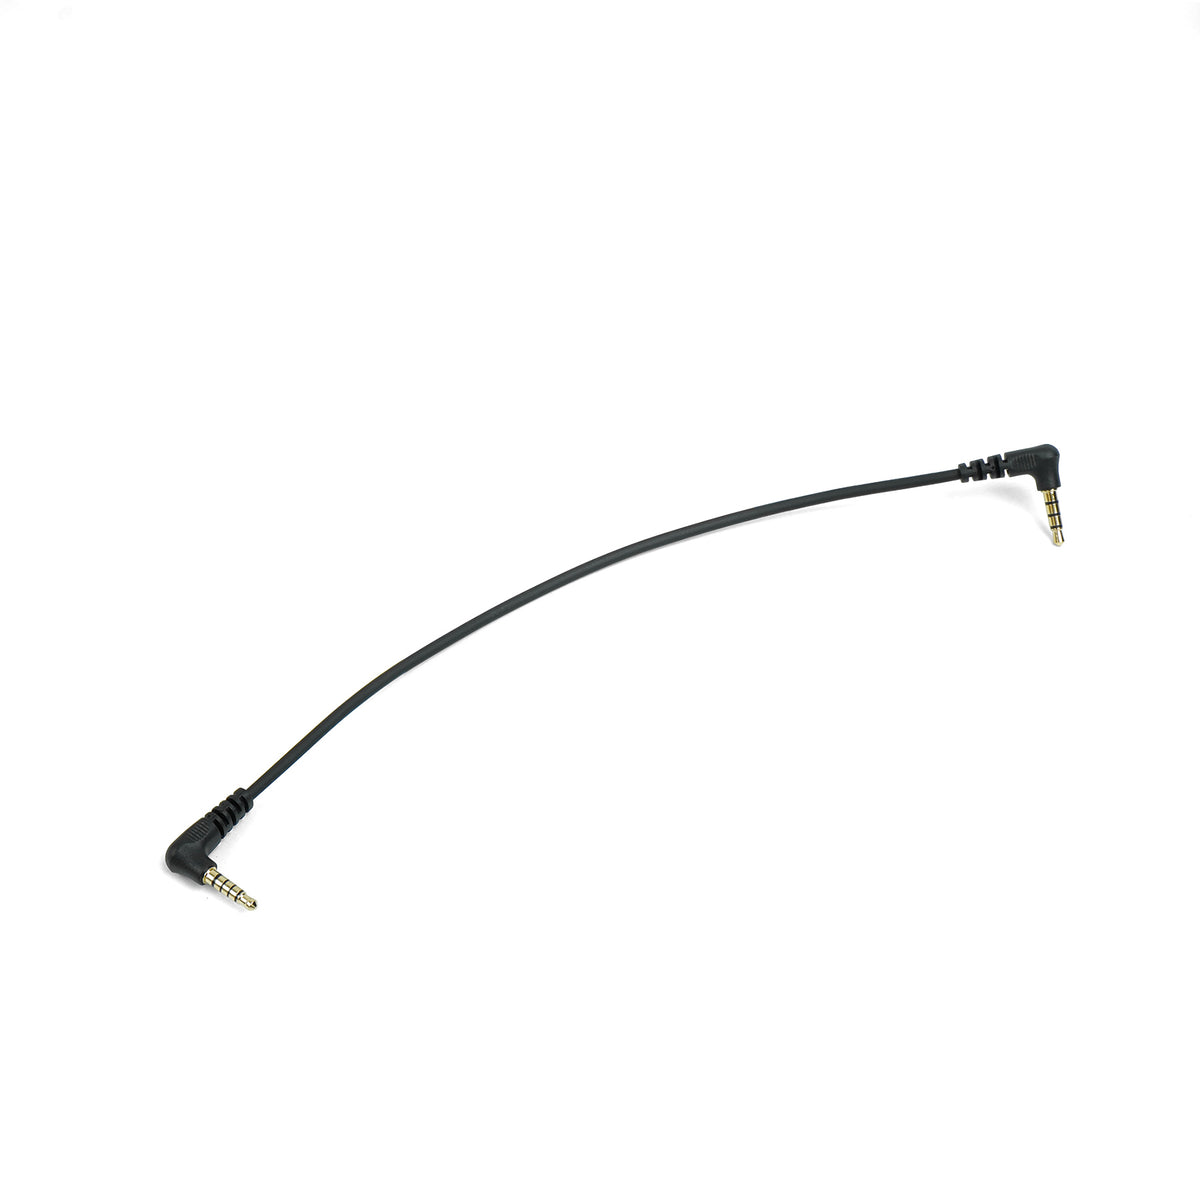 Audio Cable Dual Head 90° 4-Pole to 5-Pole for Goggles X